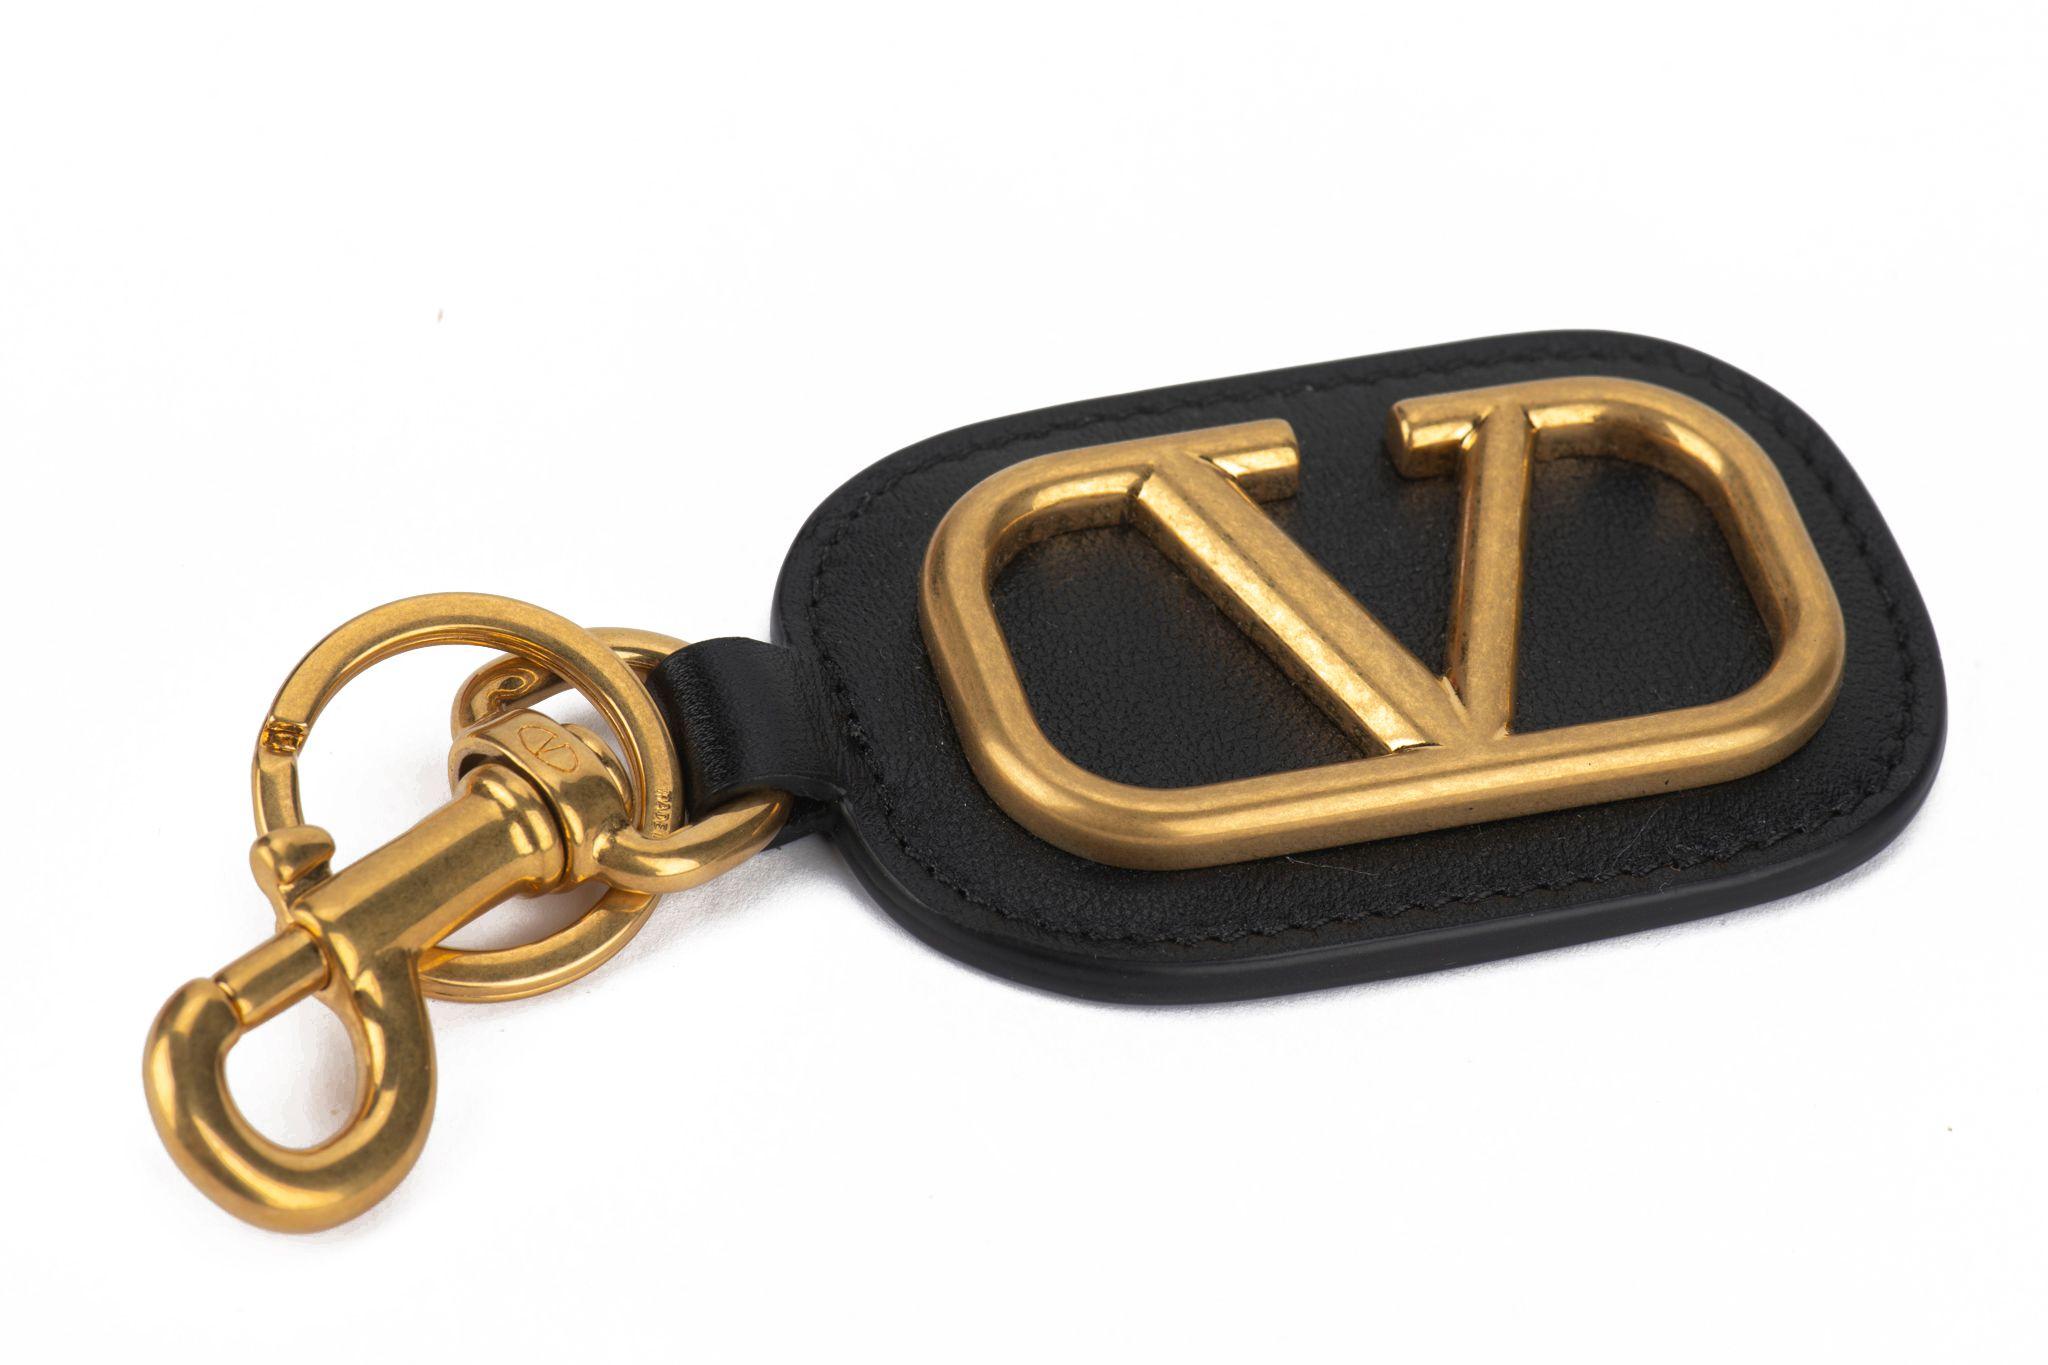 Valentino brand new logo keychain with hook. Black leather and antique gold tone hardware. 
Comes with booklets, tag, original dustcover and original box.